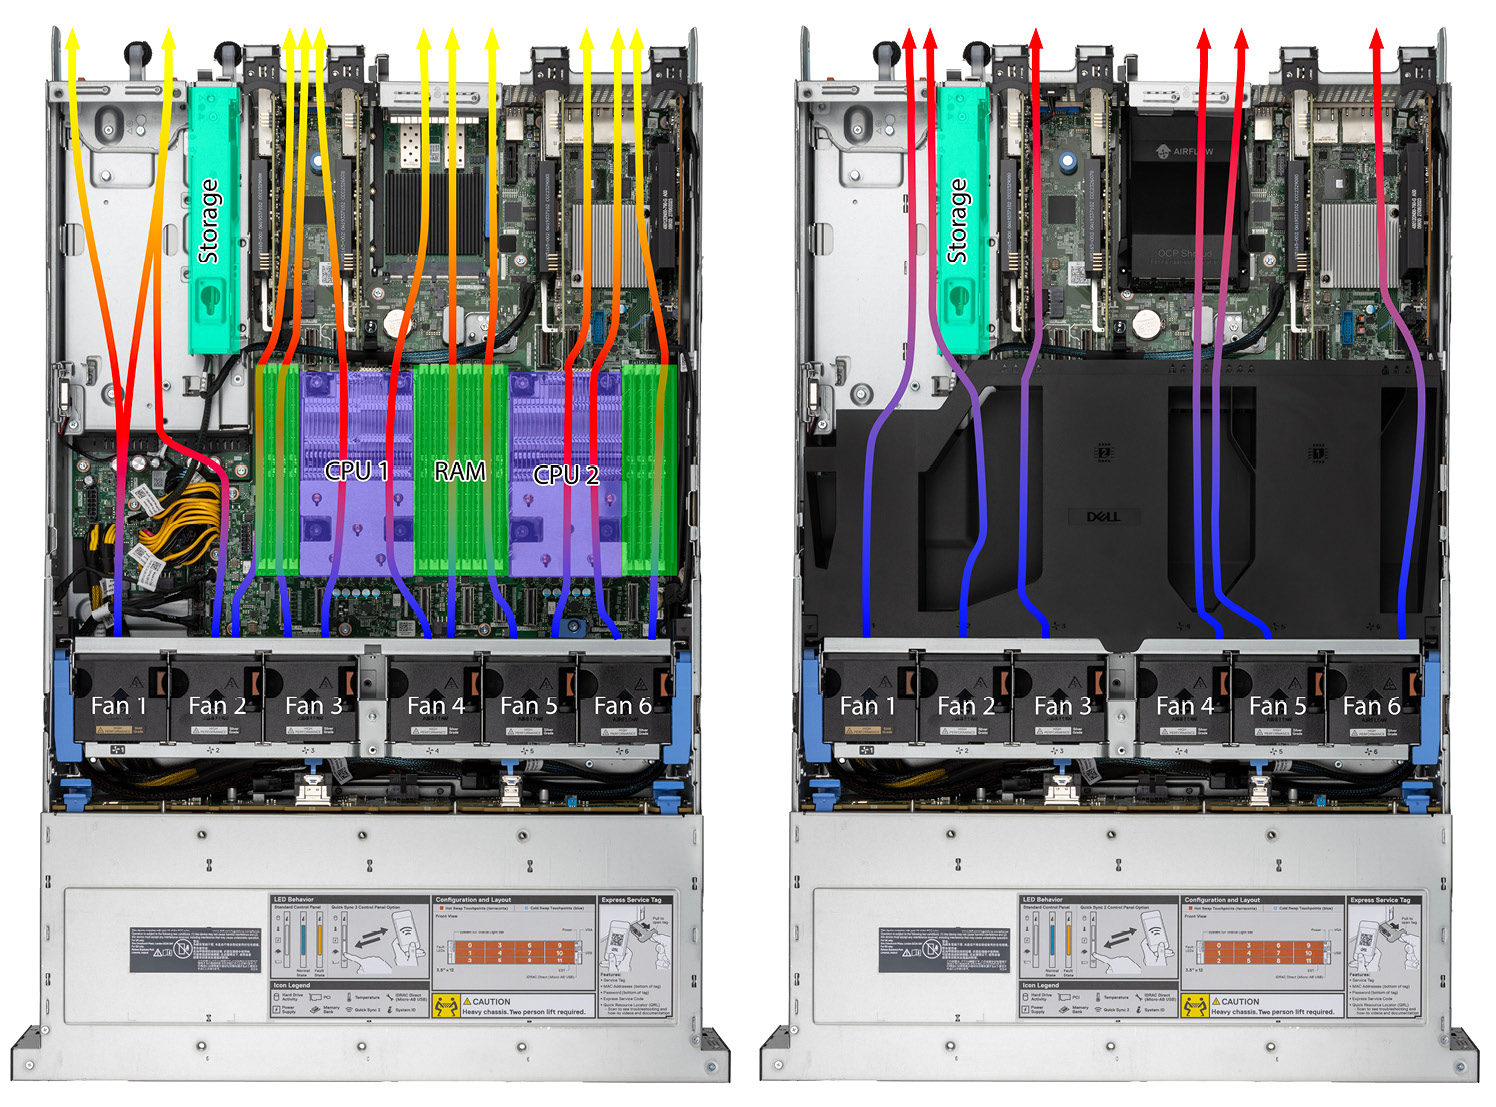 A diagram of the Dell PowerEdge HS5620 server’s motherboard. The six fans are aligned horizontally toward the front of the system, with fan 1 on the left and fan 6 on the right. In the middle of the system, the processors and memory modules are aligned in a row on right side. In the back of the system, the SSDs are behind and to the left of the row of processors and memory modules. An air shroud divides the bottom thermal layer from the top thermal layer. In the bottom thermal layer, fan 1 pushes cool air toward an SSD. Fan 2 pushes cool air next to this SSD, as well as to toward a memory module. Fans 3 through 6 push cool air toward the row of processors and memory modules behind them. Each fan’s airflow is cool when the fan first blows it, hot when it passes through the middle of the system near the components, and warm as it exits the back of the system. In the top thermal layer, the air shroud covers the row of processors and memory modules. All six fans blow air, which remains cold as it passes over the shroud, and becomes hot as it passes the SSDs and exits the back of the system.